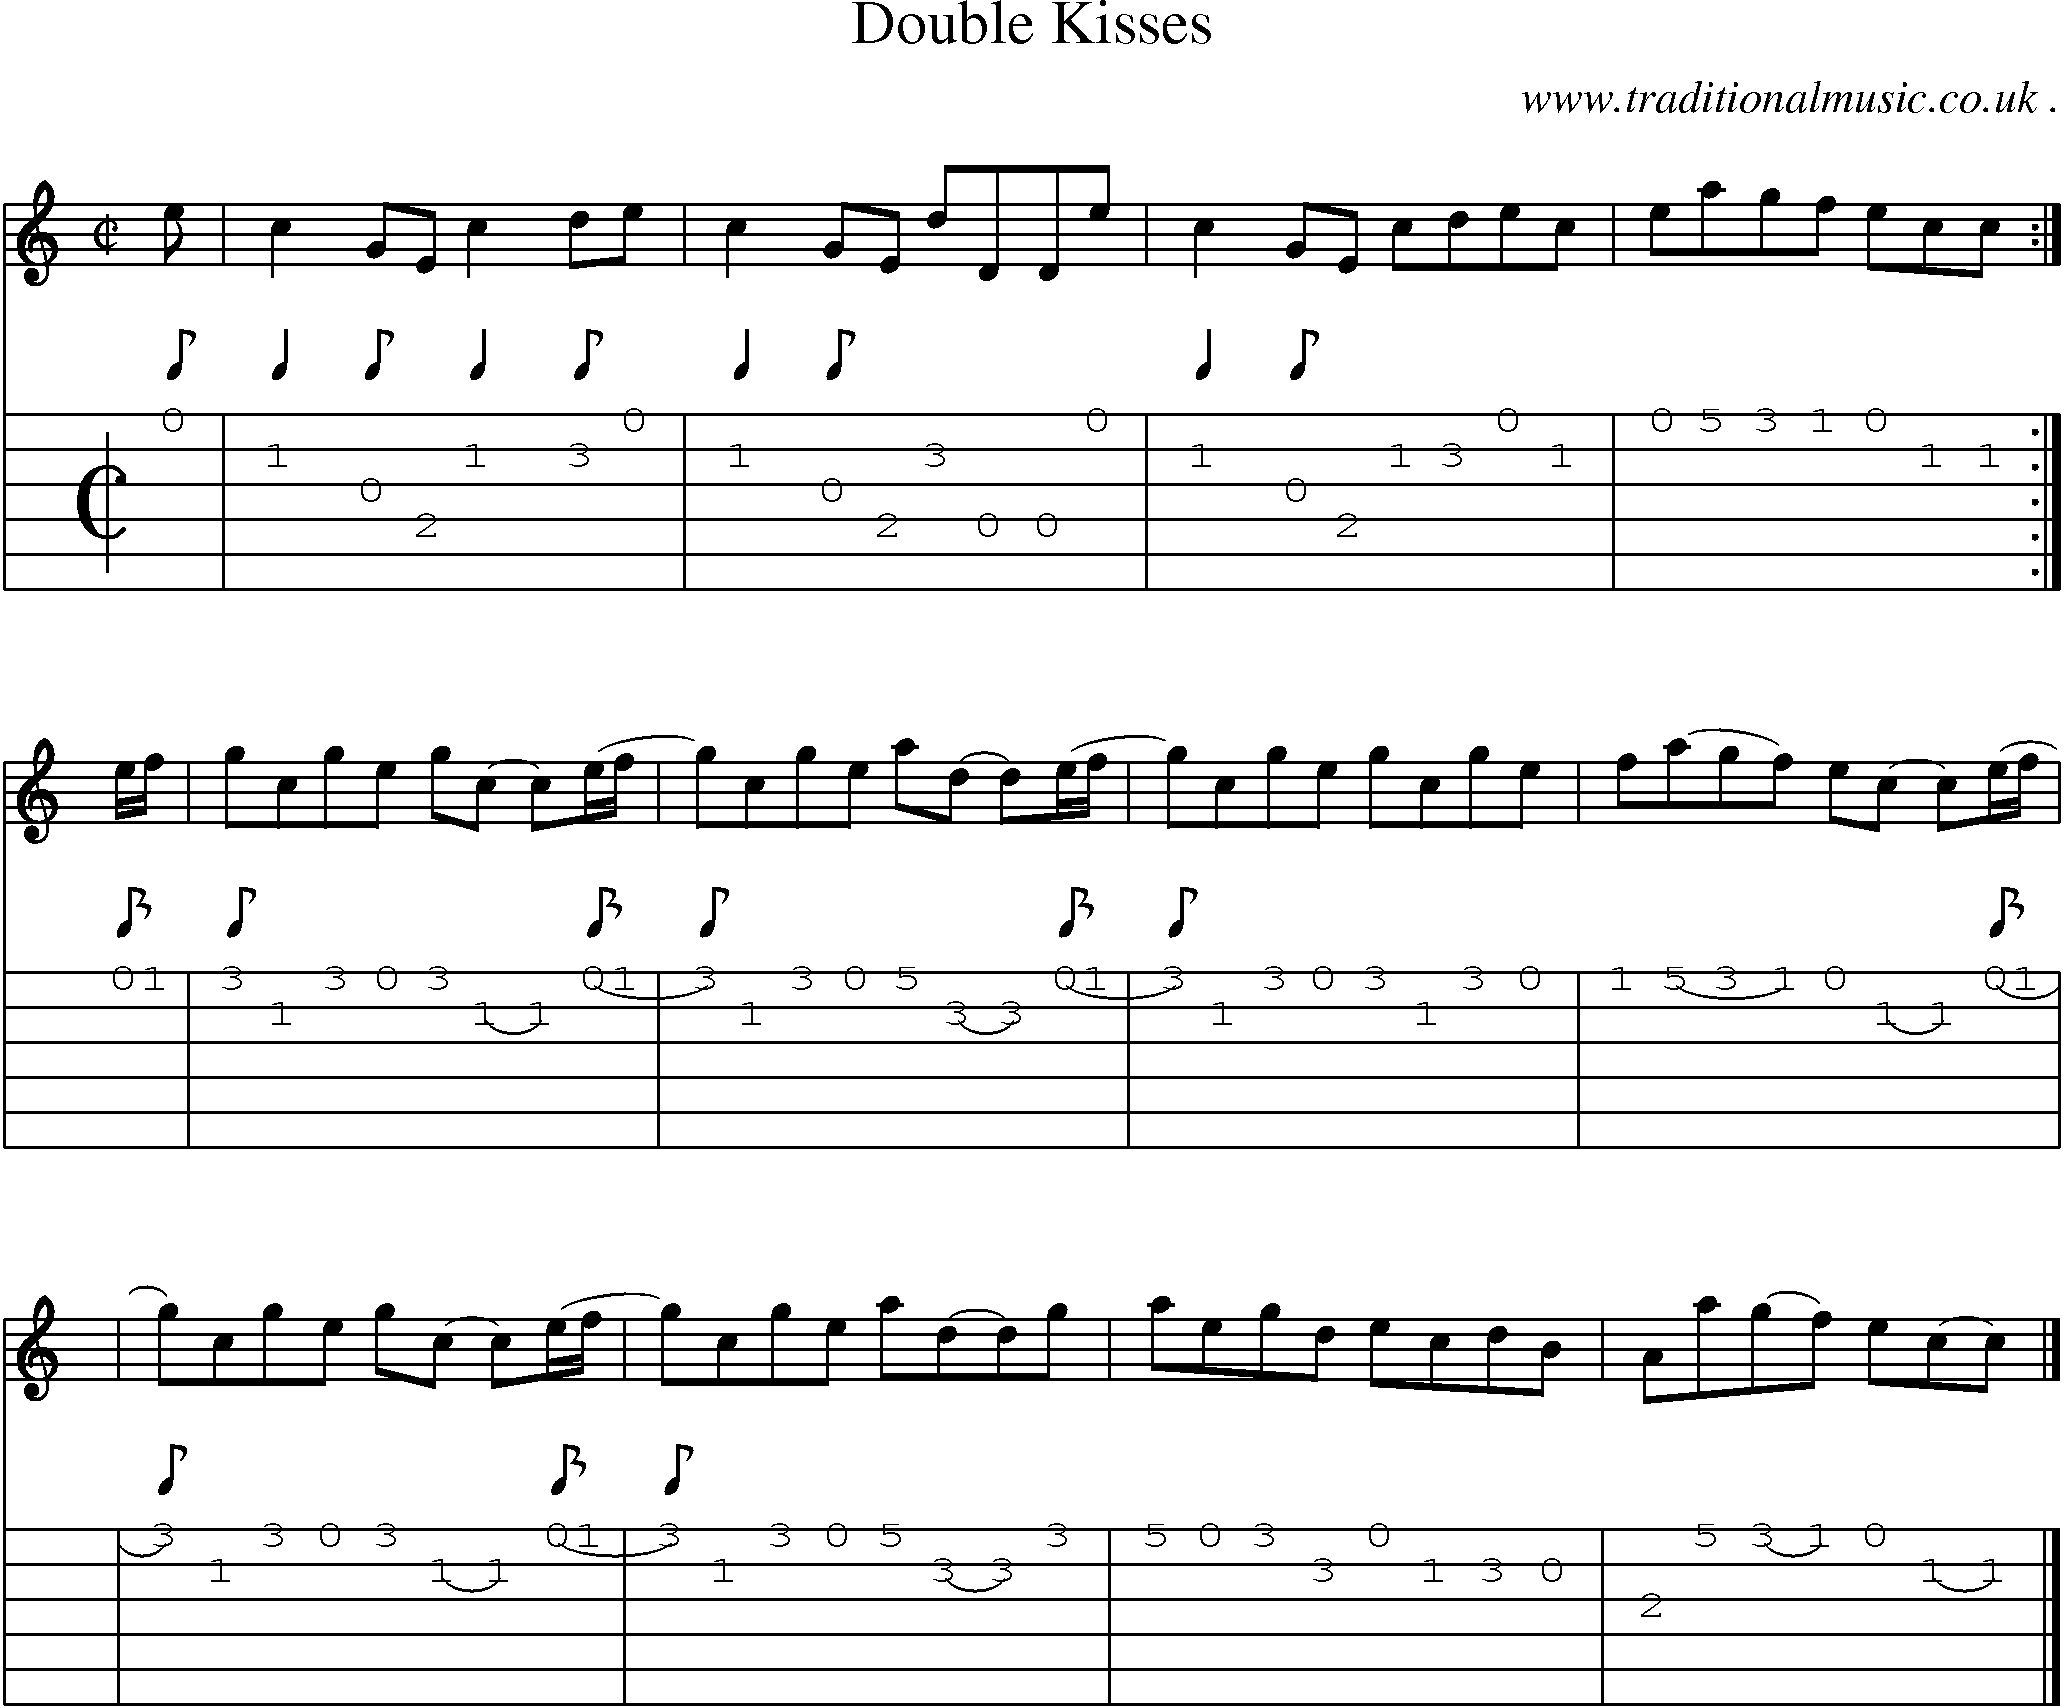 Sheet-music  score, Chords and Guitar Tabs for Double Kisses